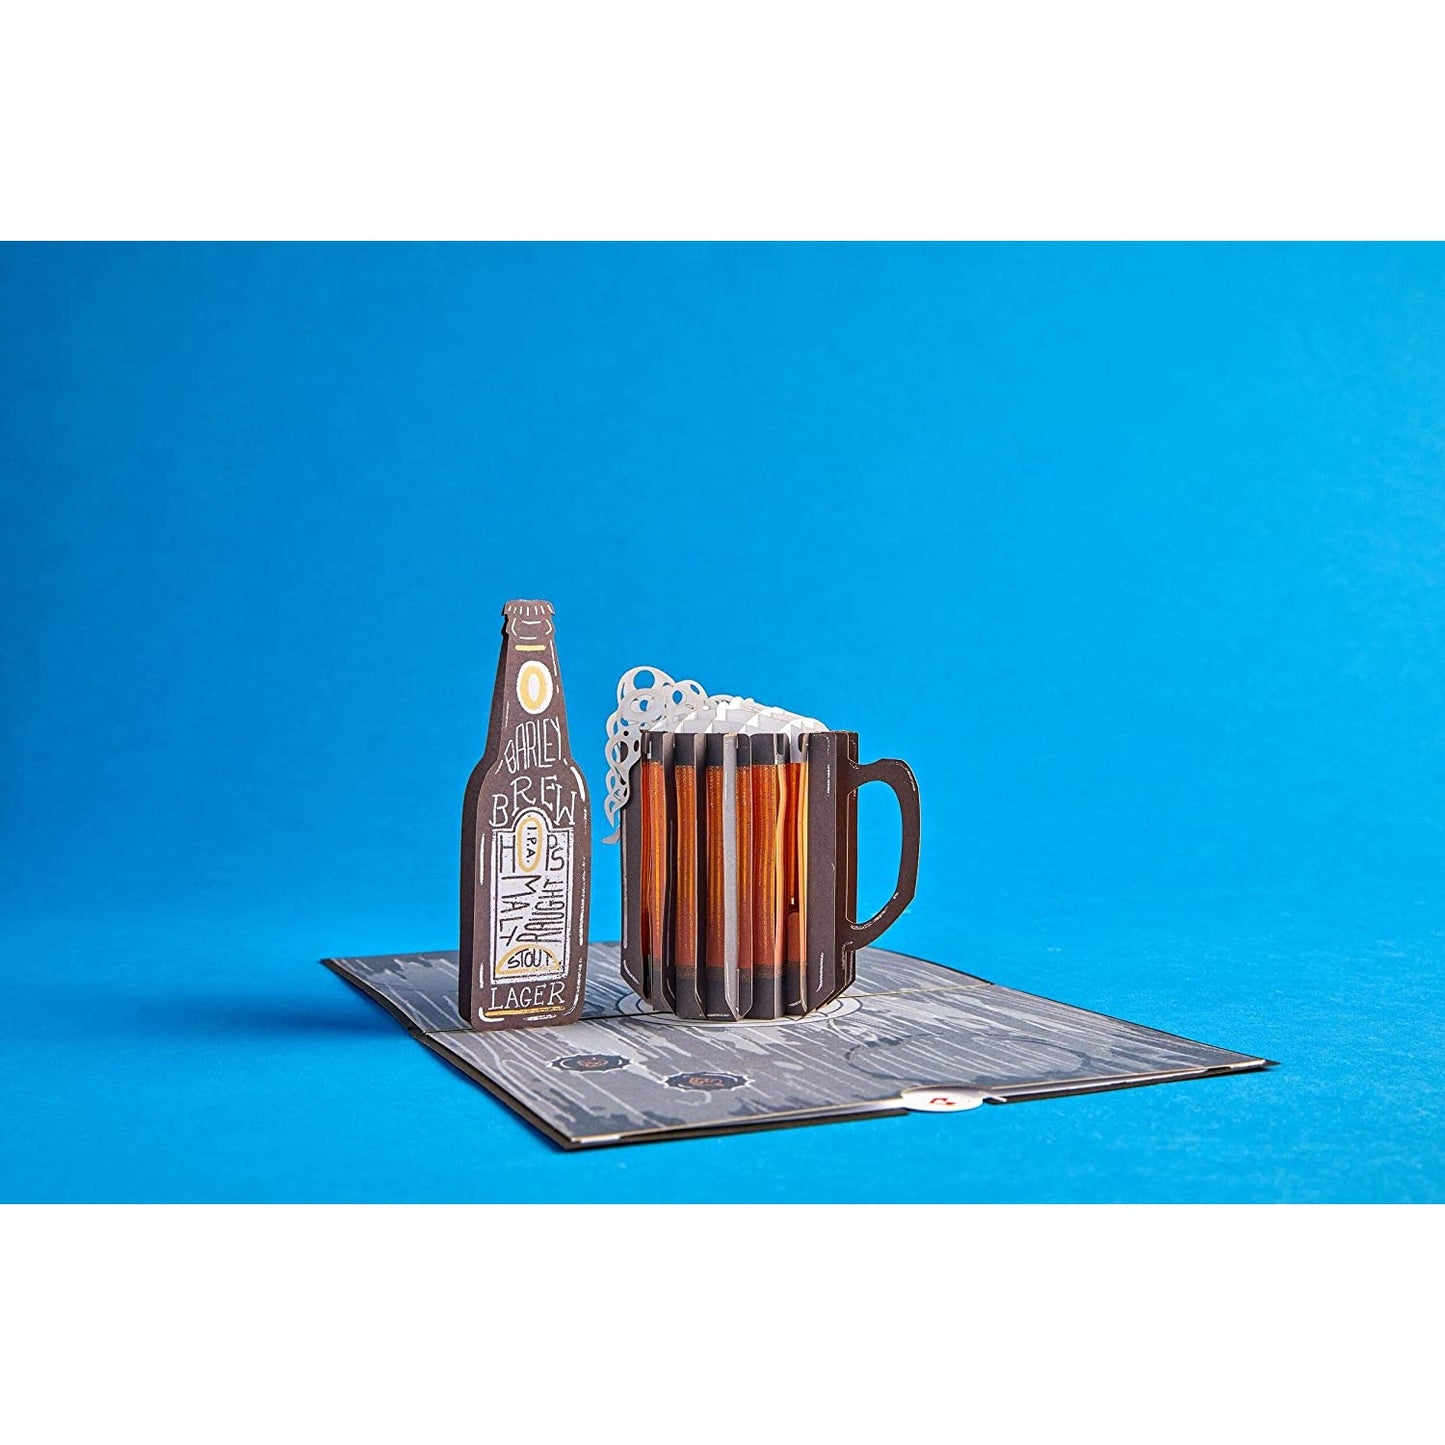 A 3D pop-up greeting card featuring a beer bottle and a beer stein.